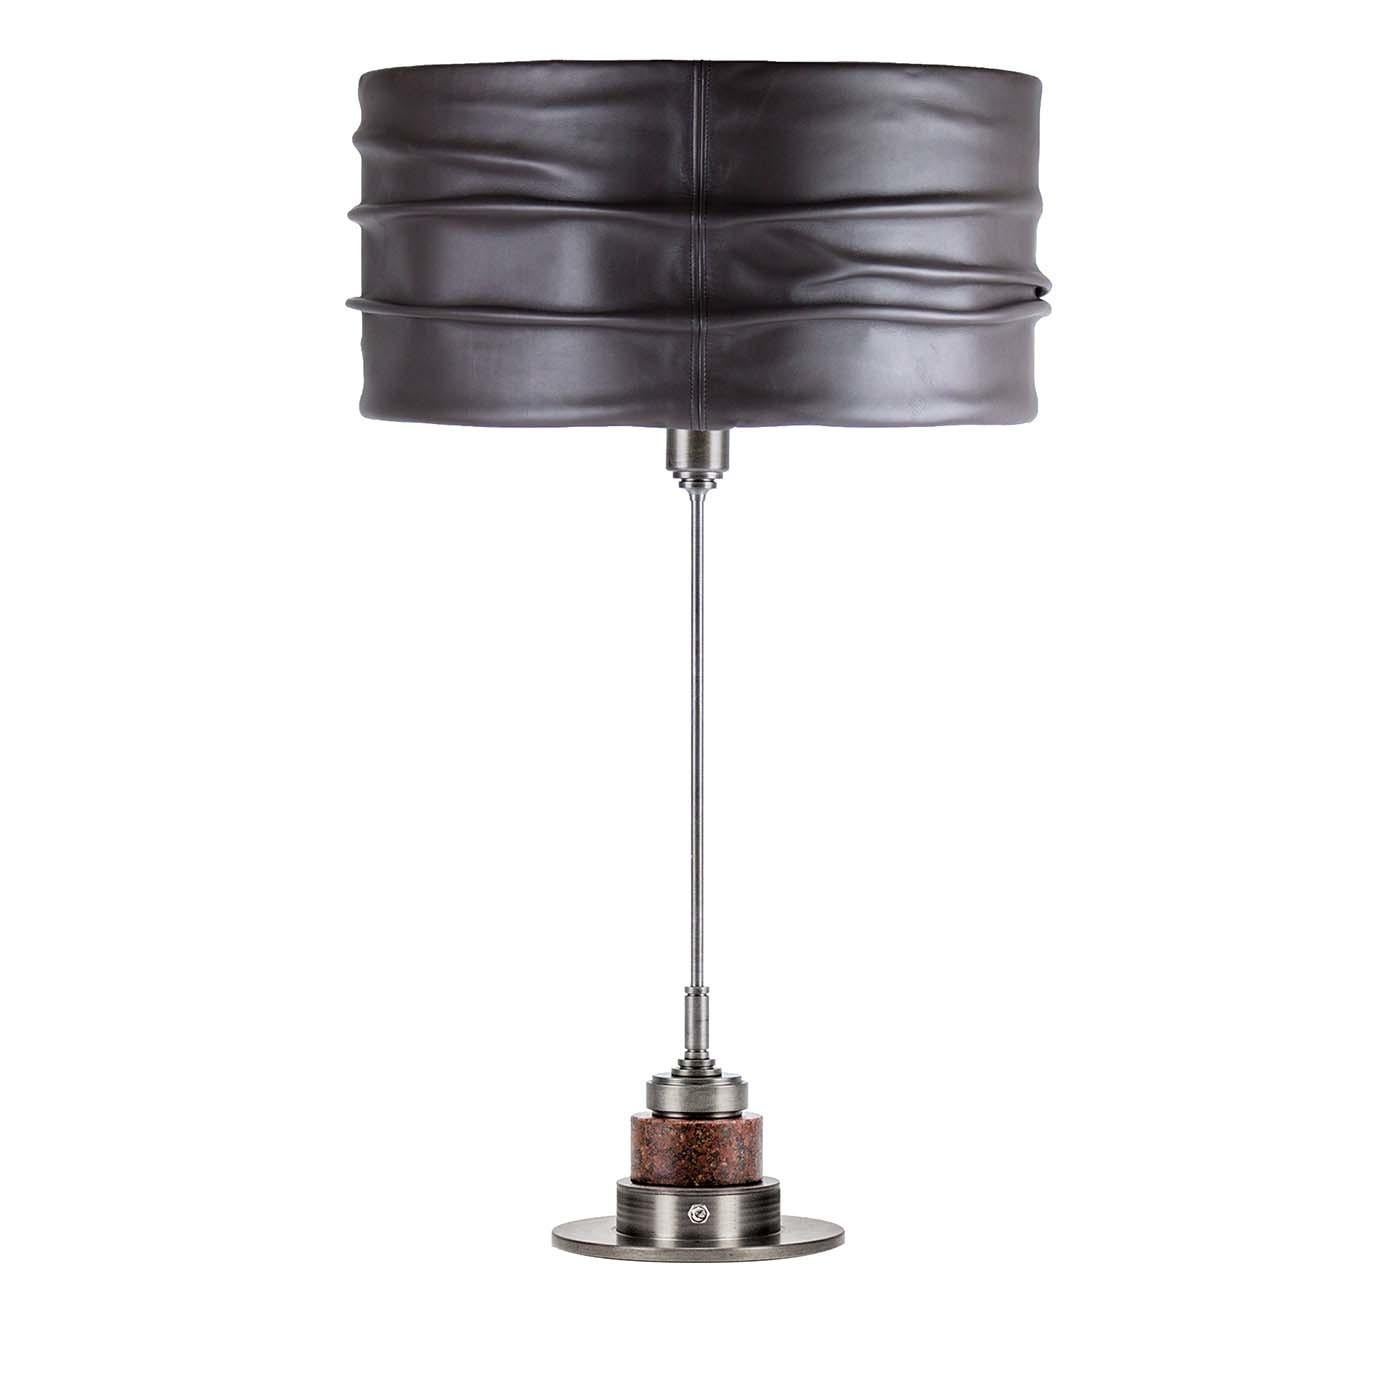 Perfect for adding an eye-catching accent in any room, this table lamp is a chic option for brightening any room, from a living room to an entryway. Handcrafted of steel, it features a circular steel base, surmounted by a cylindrical granite shaft